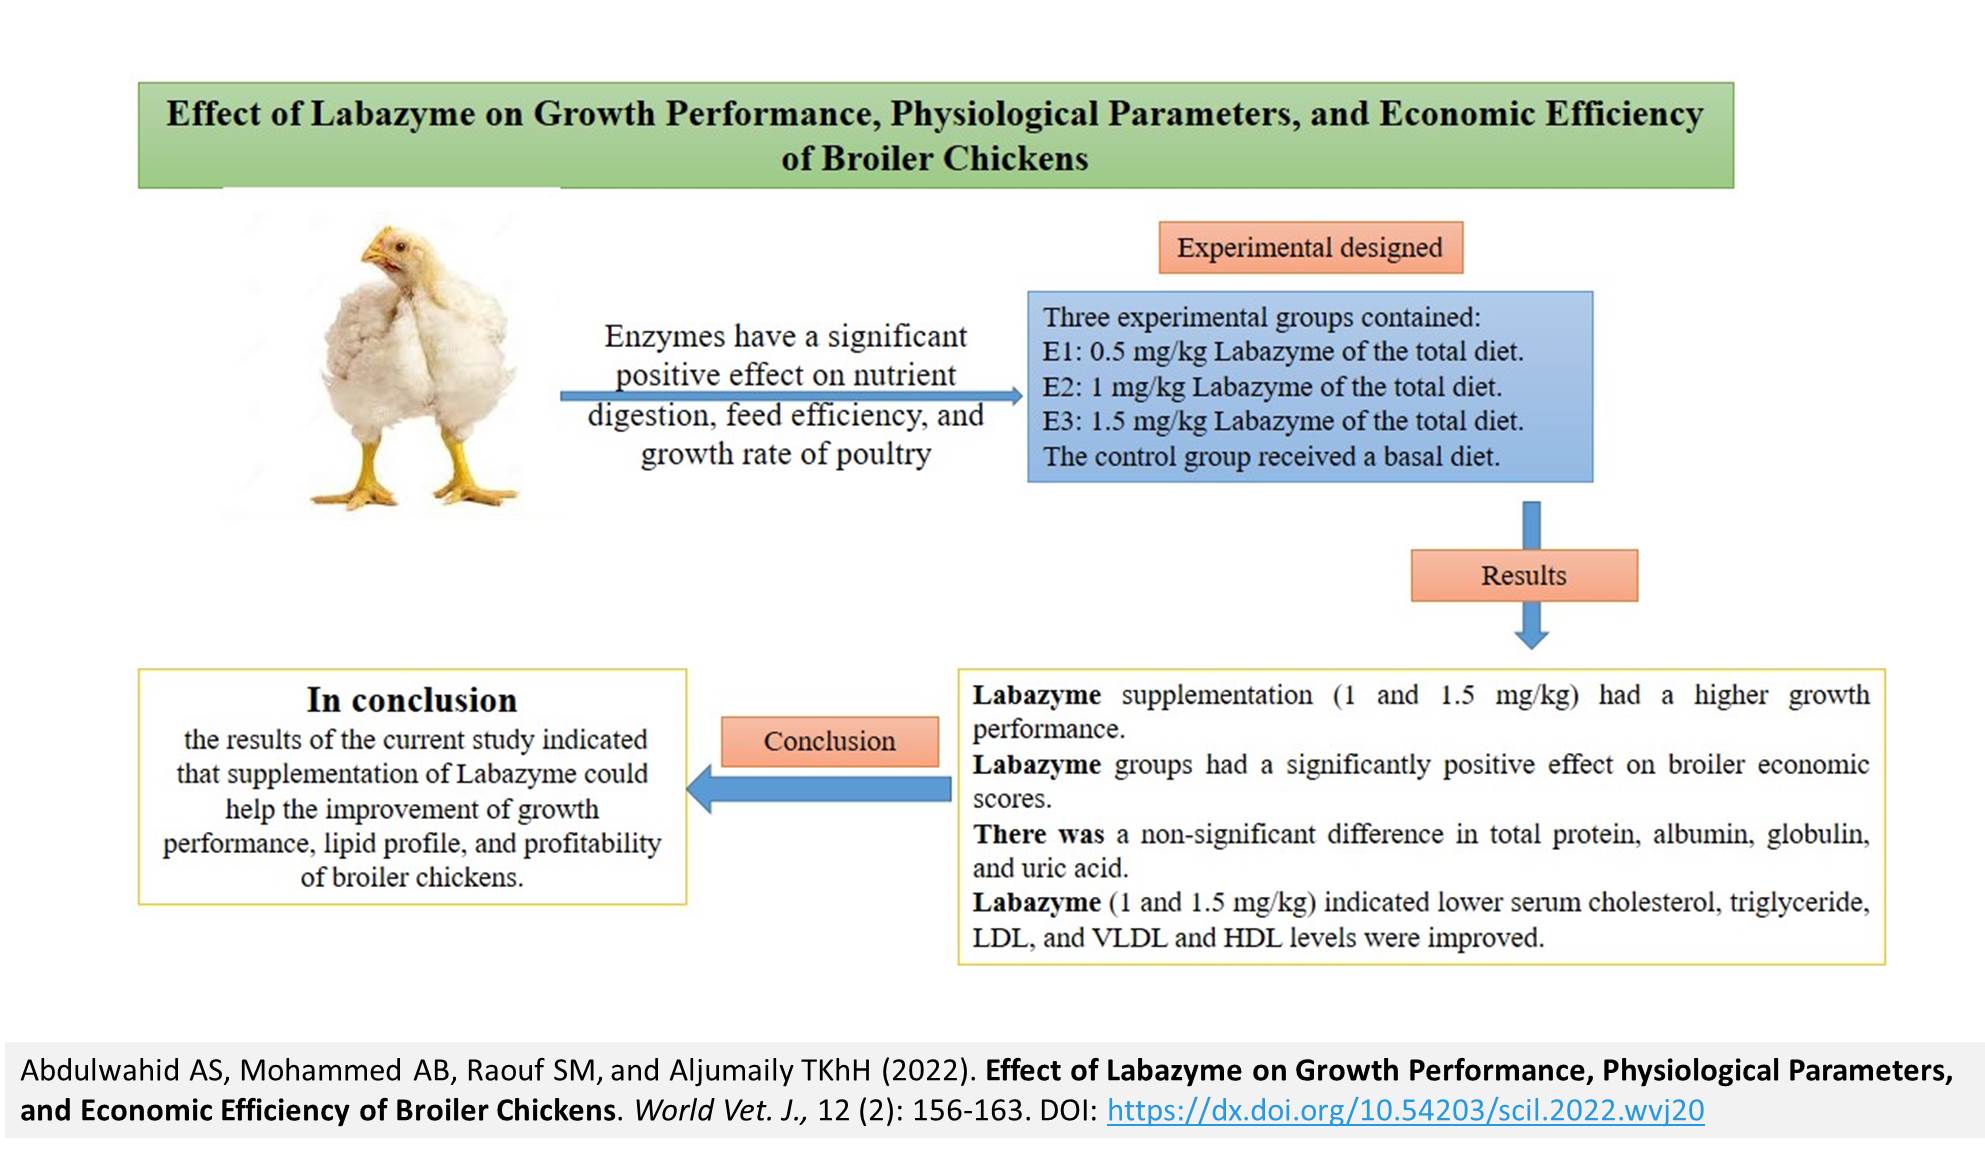 137-Labazyme_on_Growth_Performance_of_Broiler_Chickens